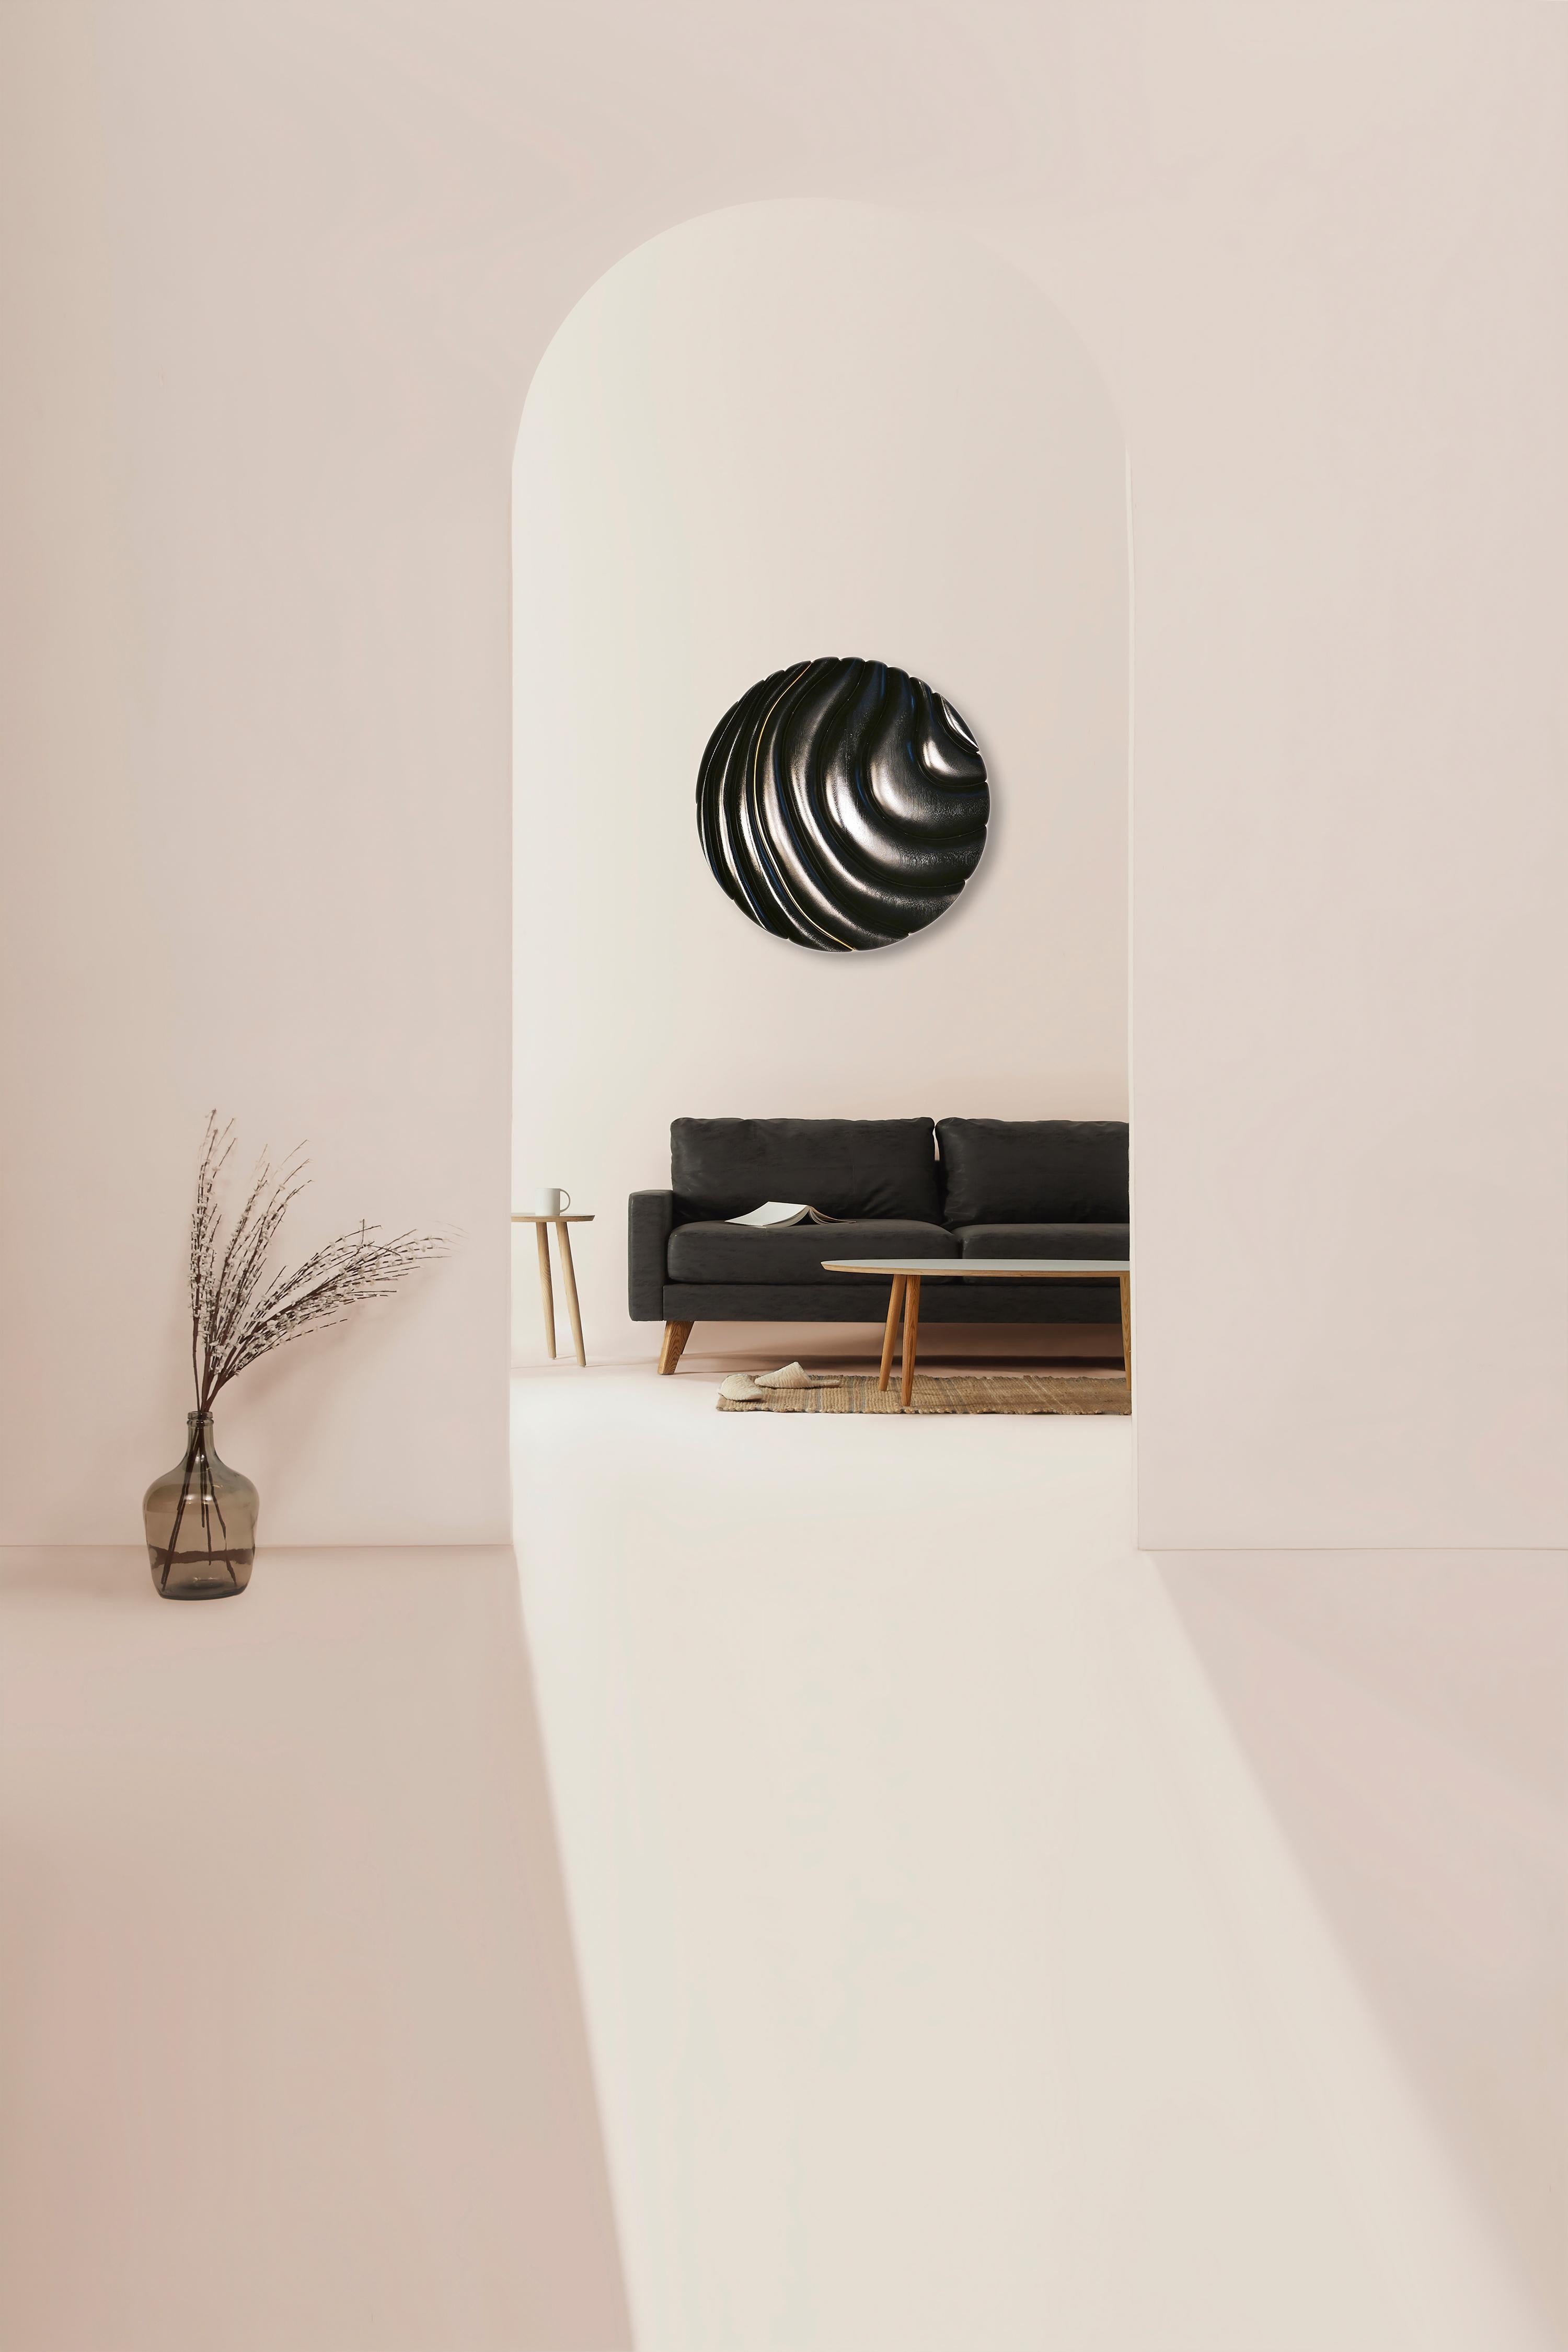 Wood Contemporary Wall Mounted Sculpture from 'Delta' Series by James Rowland